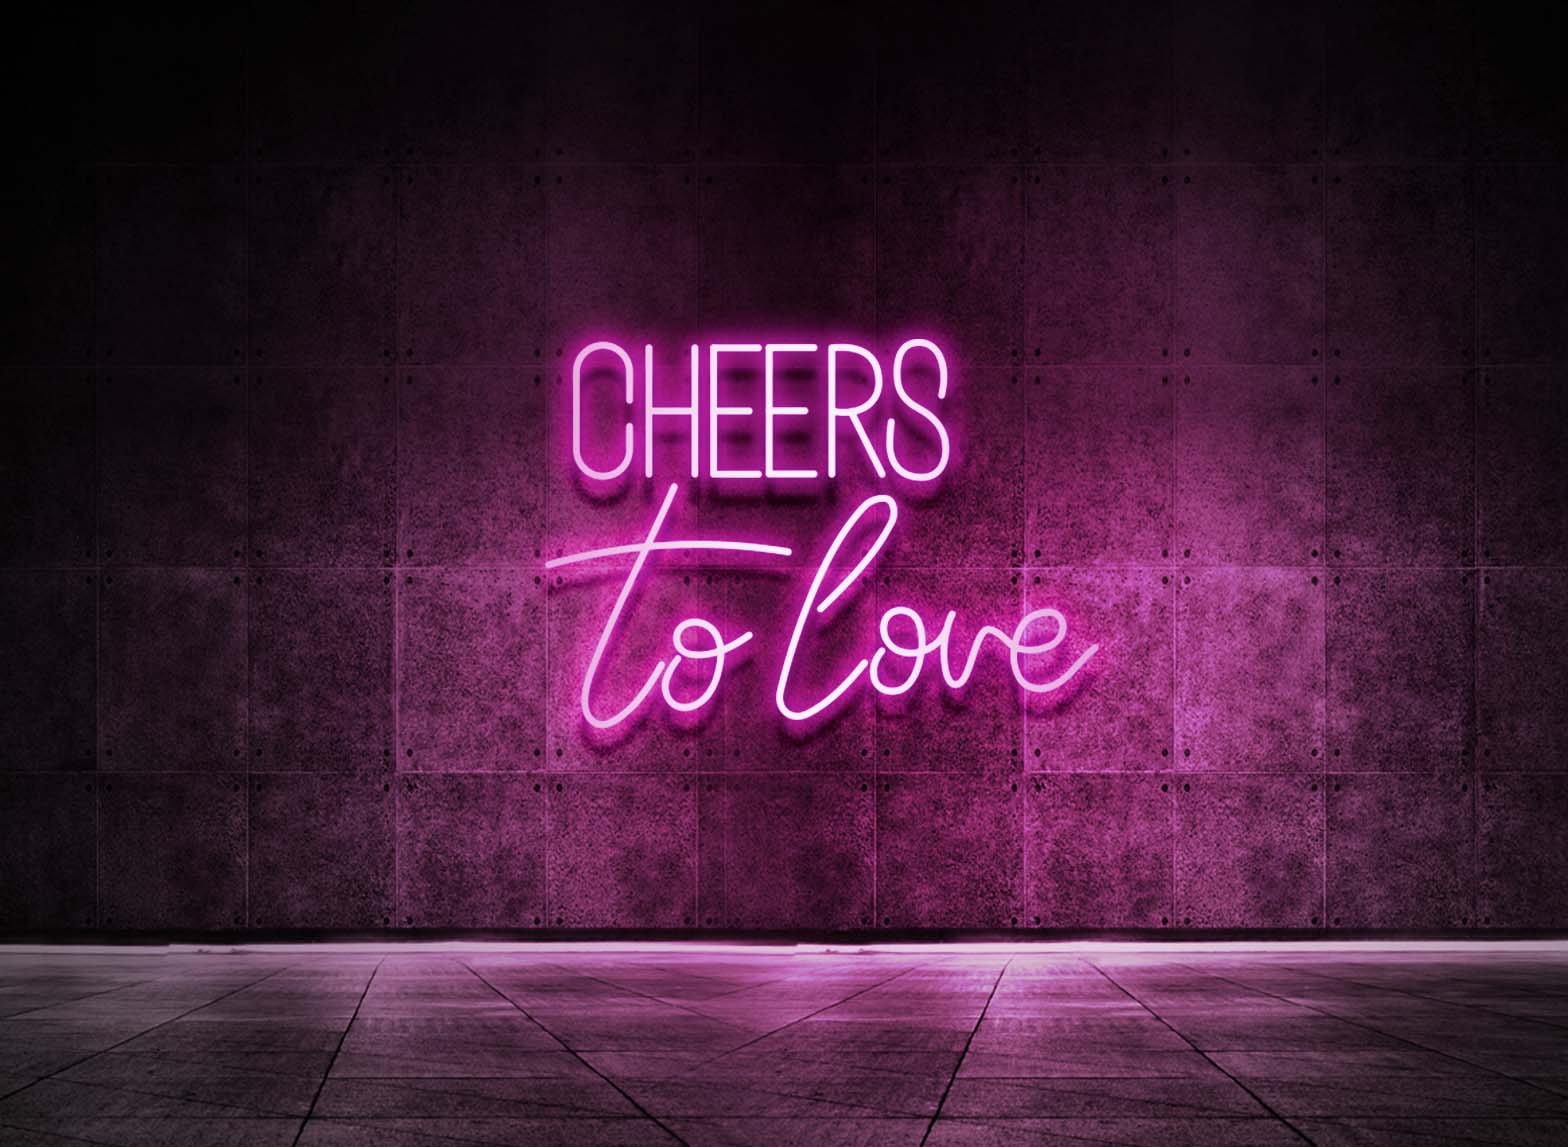 CHEERS TO LOVE